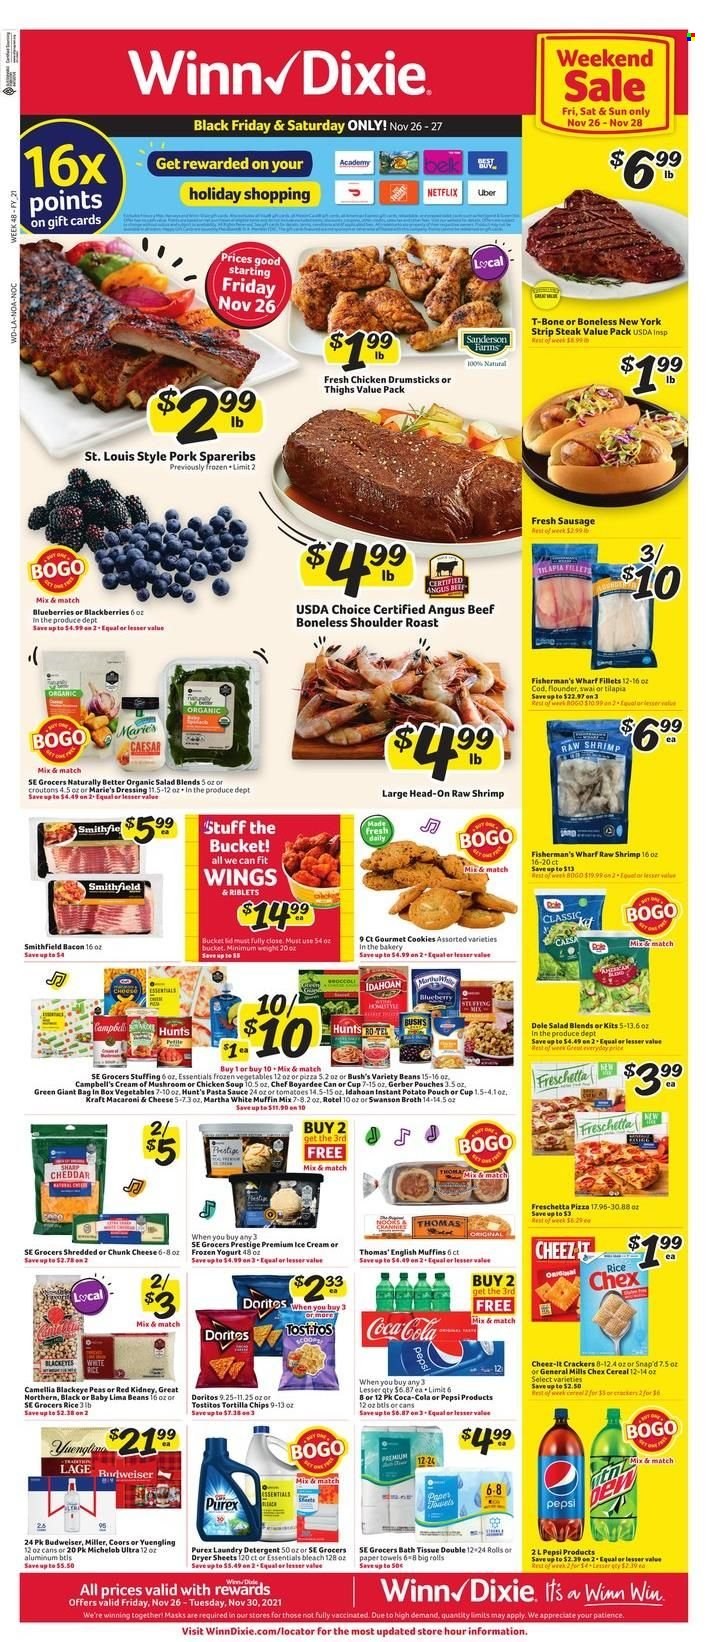 thumbnail - Winn Dixie Flyer - 11/26/2021 - 11/30/2021 - Sales products - english muffins, muffin mix, beans, peas, salad, blackberries, blueberries, cod, flounder, tilapia, shrimps, Campbell's, macaroni & cheese, pizza, pasta sauce, chicken soup, soup, sauce, Kraft®, bacon, sausage, chunk cheese, yoghurt, ice cream, frozen vegetables, lima beans, cookies, crackers, Doritos, Gerber, tortilla chips, Cheez-It, Tostitos, croutons, broth, Chef Boyardee, cereals, rice, dressing, Coca-Cola, Pepsi, beer, Miller, baby food pouch, chicken drumsticks, beef meat, t-bone steak, steak, striploin steak, pork spare ribs, bath tissue, kitchen towels, paper towels, detergent, bleach, laundry detergent, dryer sheets, Purex, bag, cup, Sharp, Budweiser, Coors, Yuengling, Michelob. Page 1.